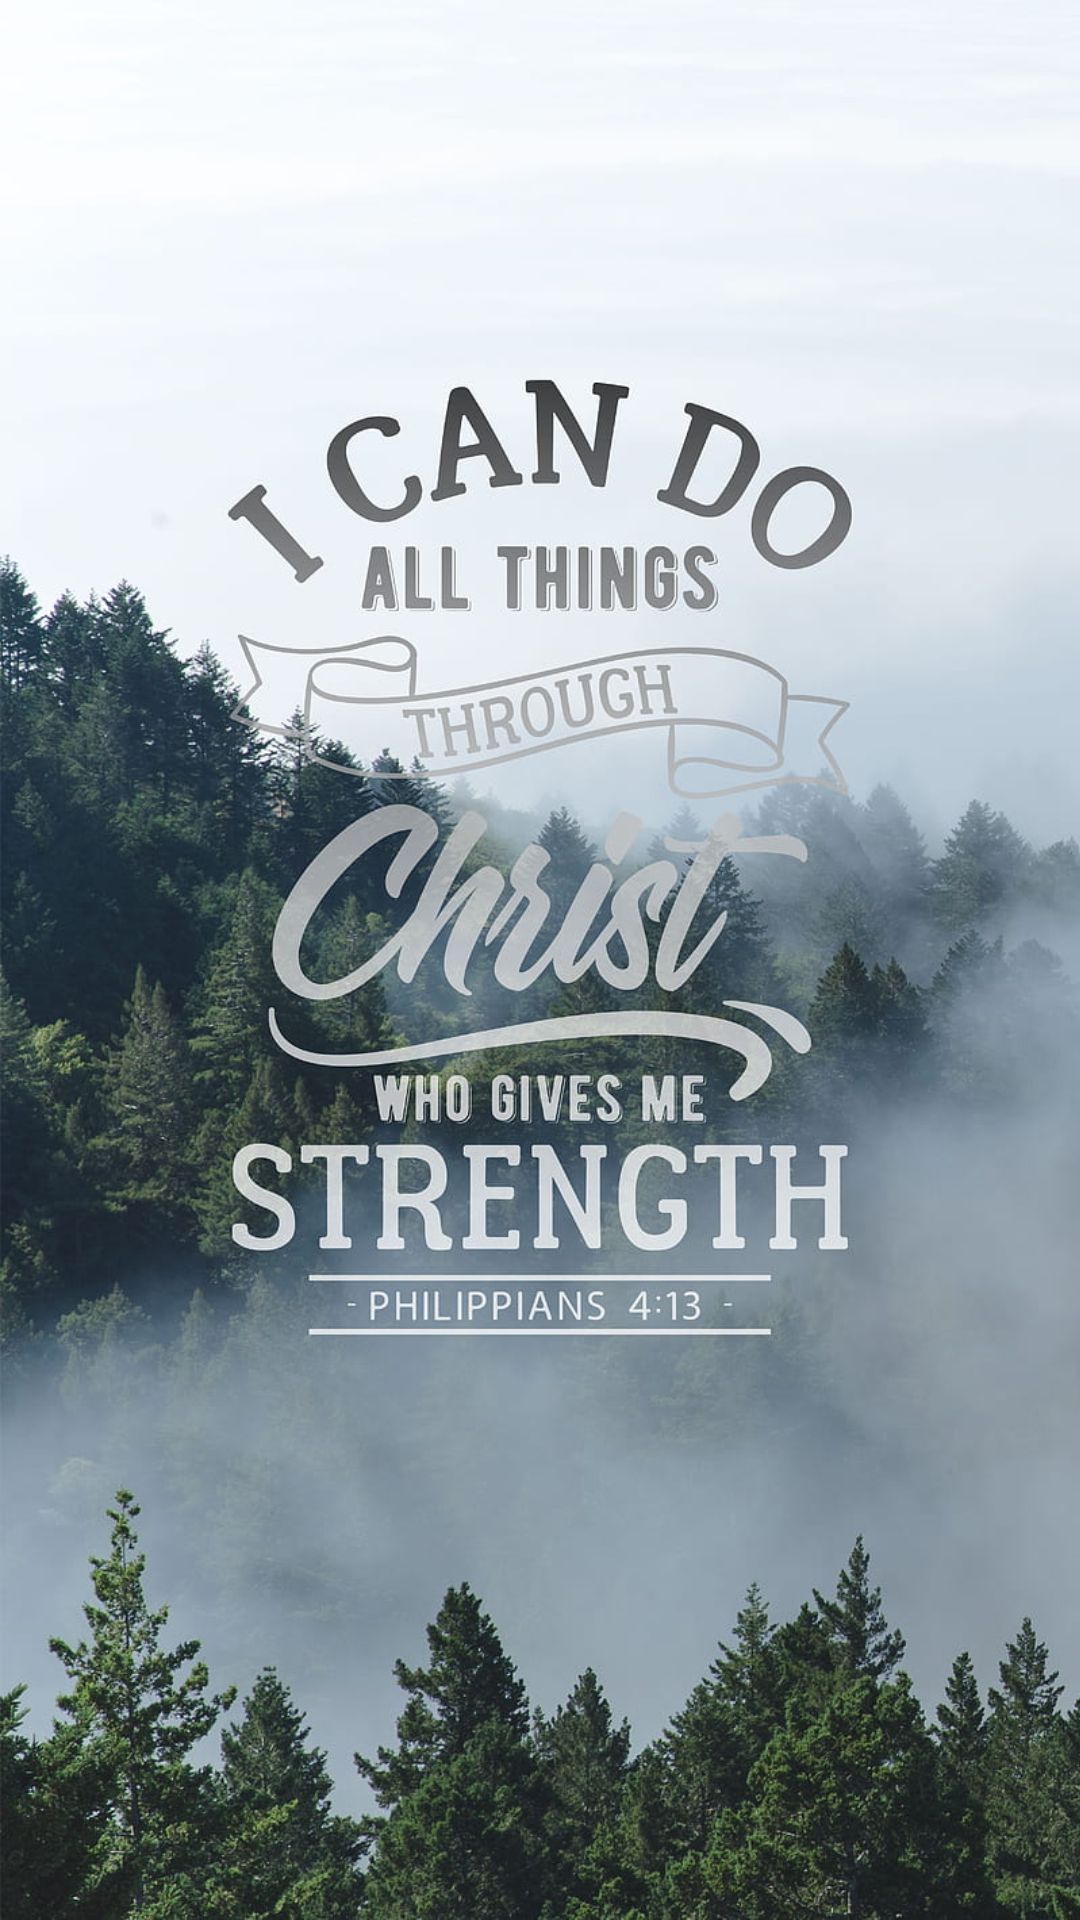 I can do all things through Christ who gives me strength. - Philippians 4:13 - Bible